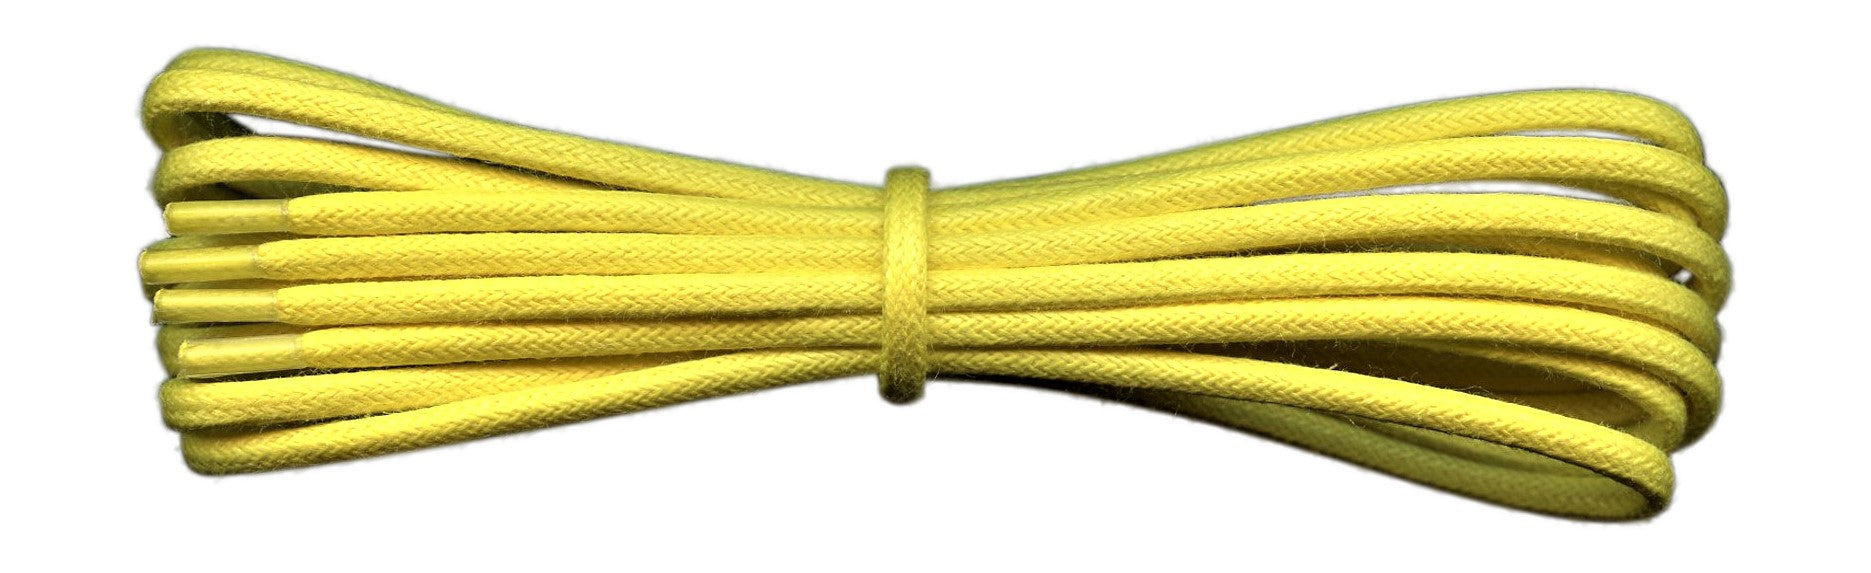 Fabmania yellow 2 mm round waxed cotton shoe laces